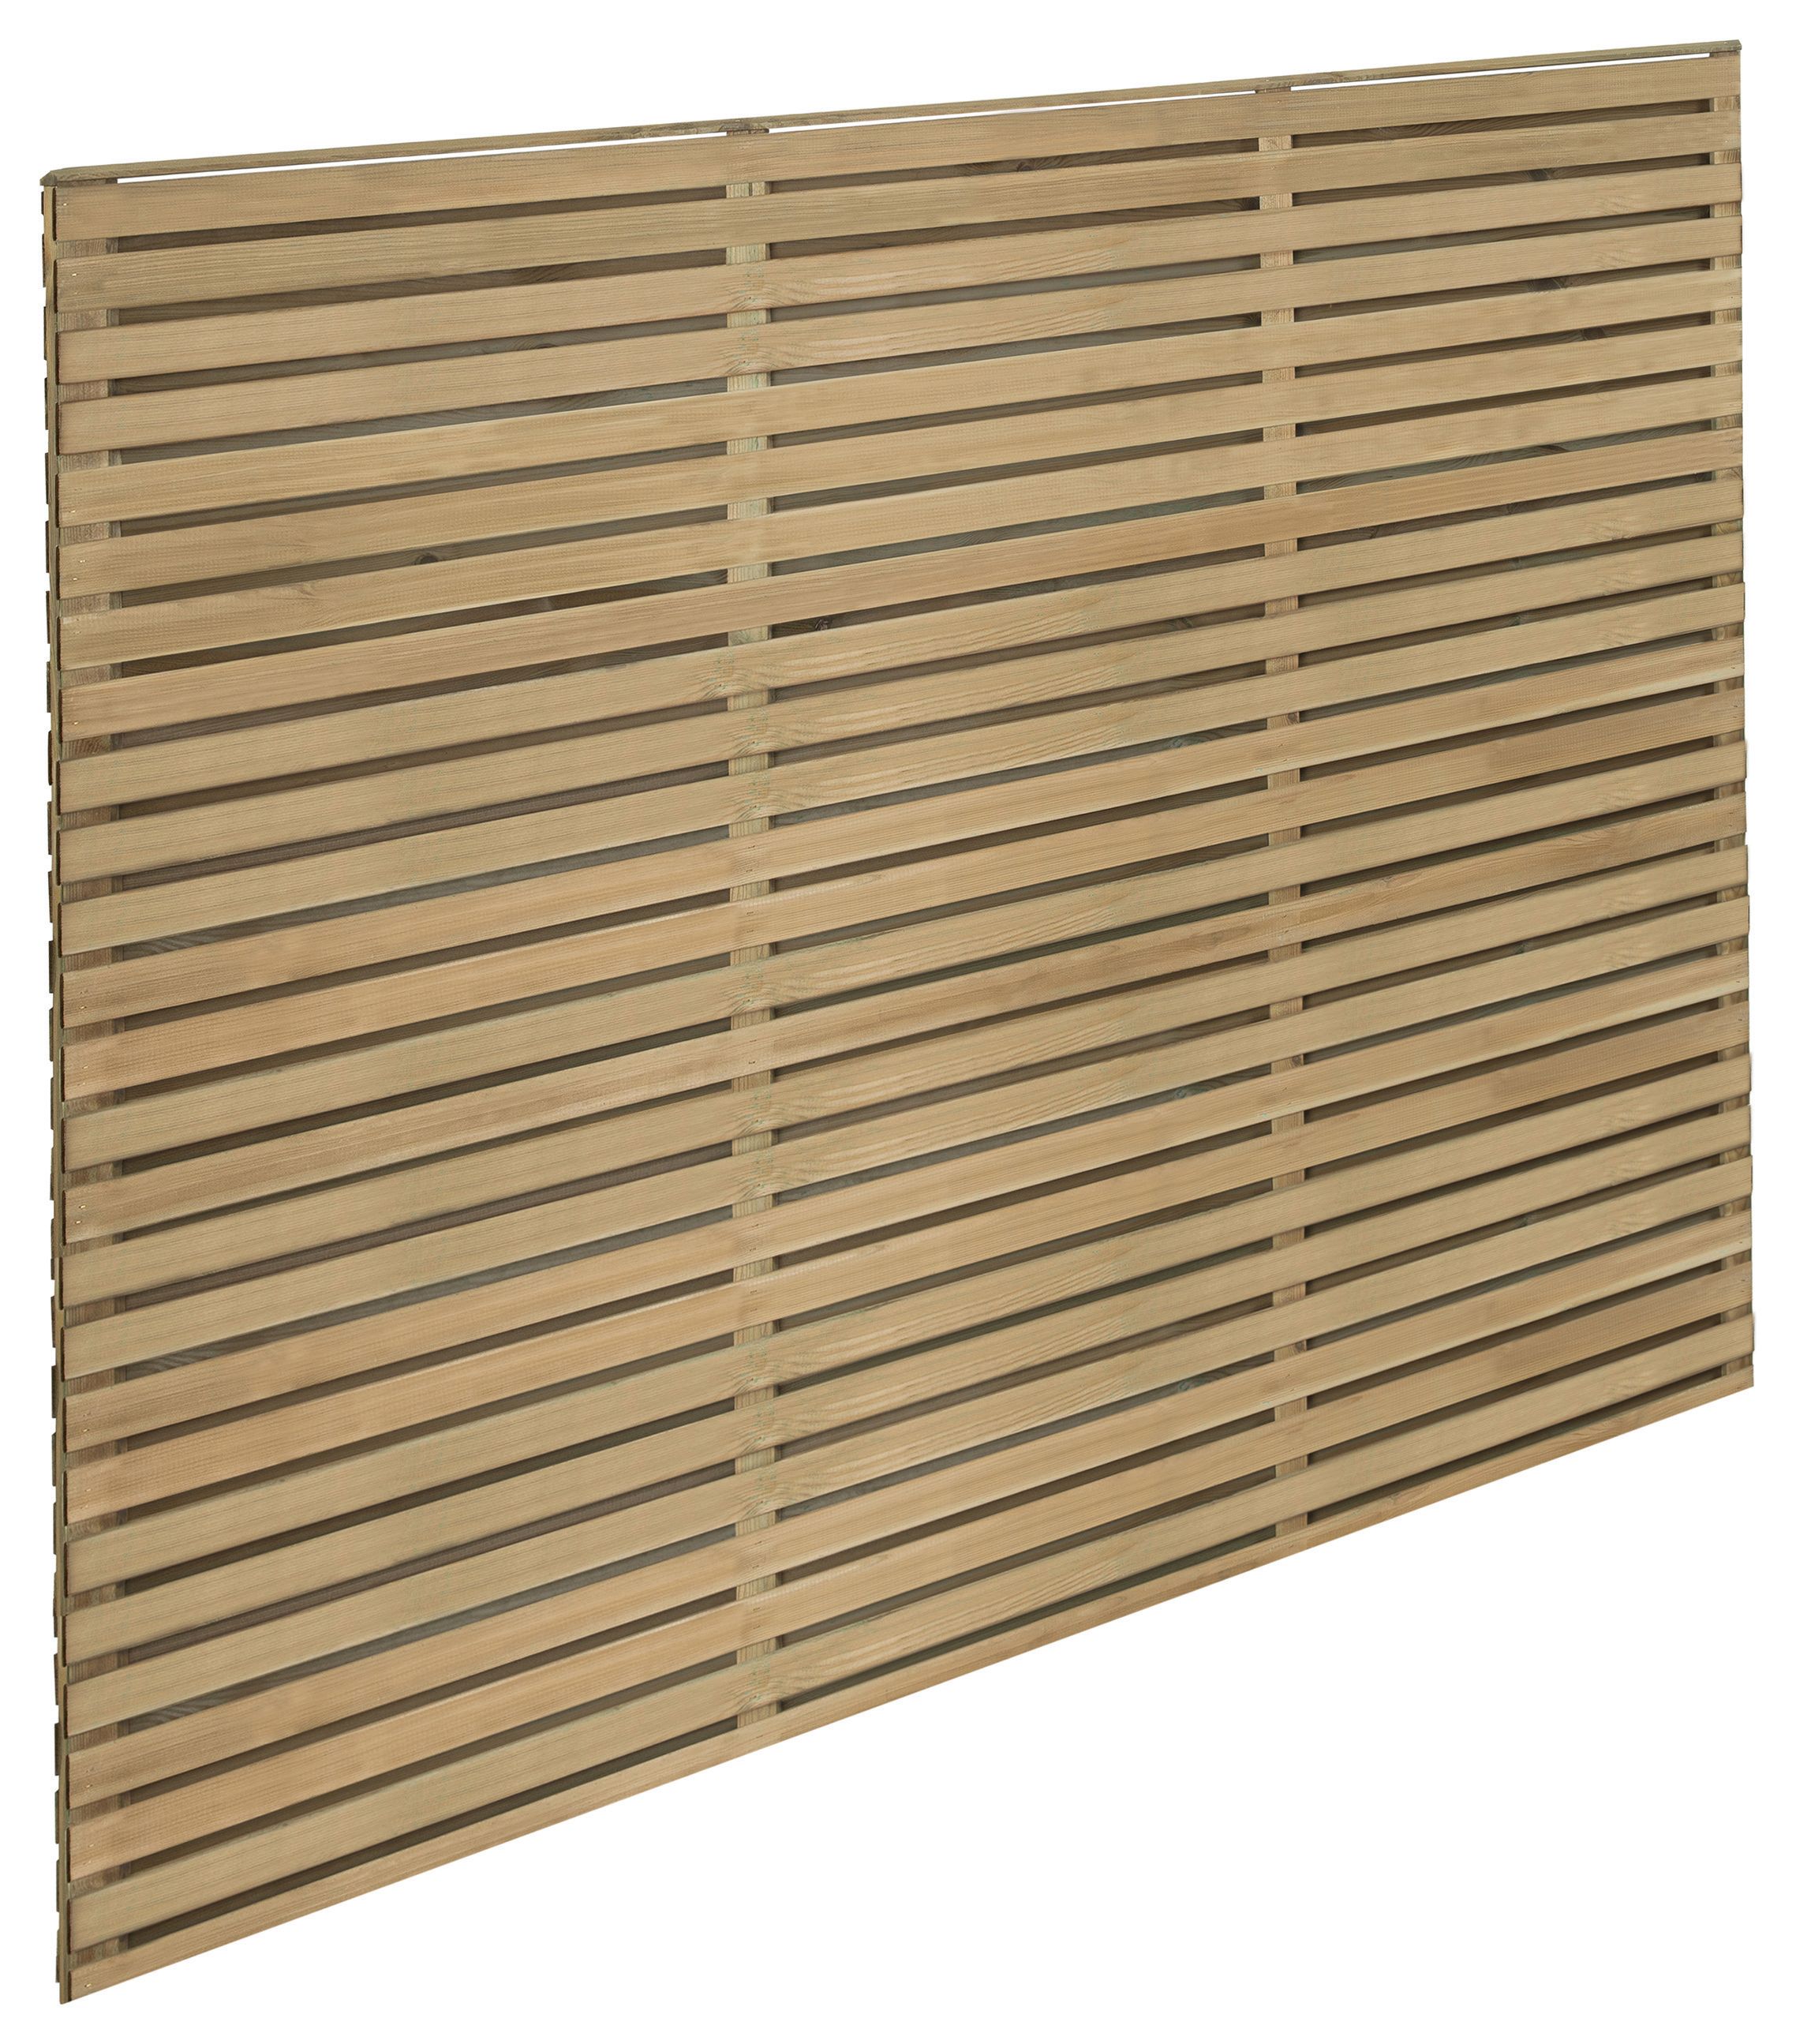 Image of Forest Garden Double Slatted Fence Panel - 1800 x 1500mm - 6 x 5ft - Pack of 5